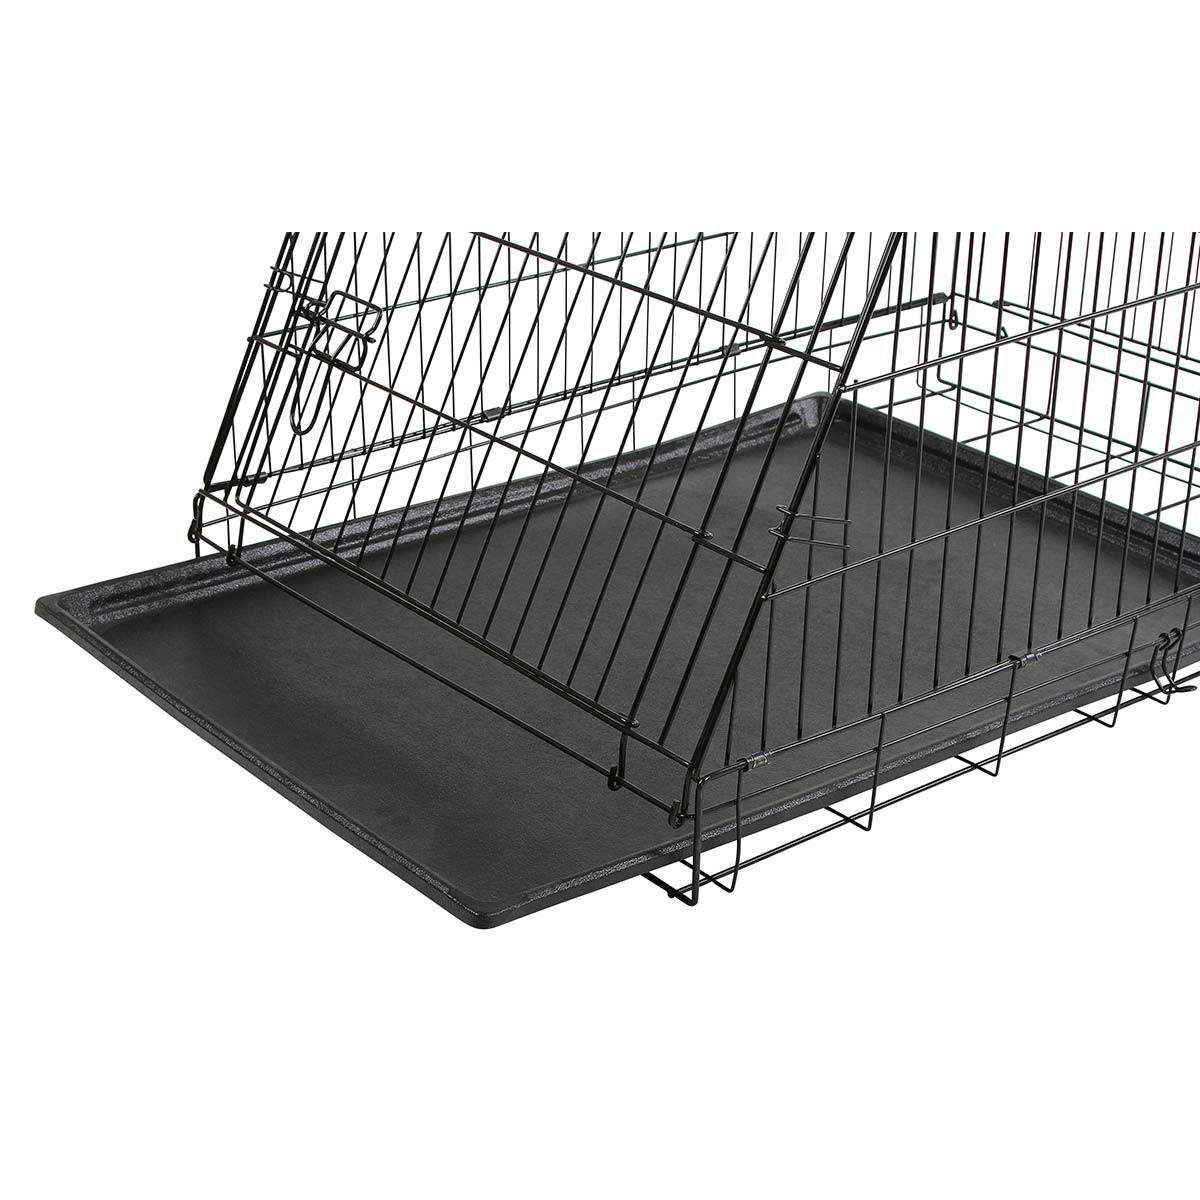 Dog Cage collapsible black 76x54x64cm, 2 doors